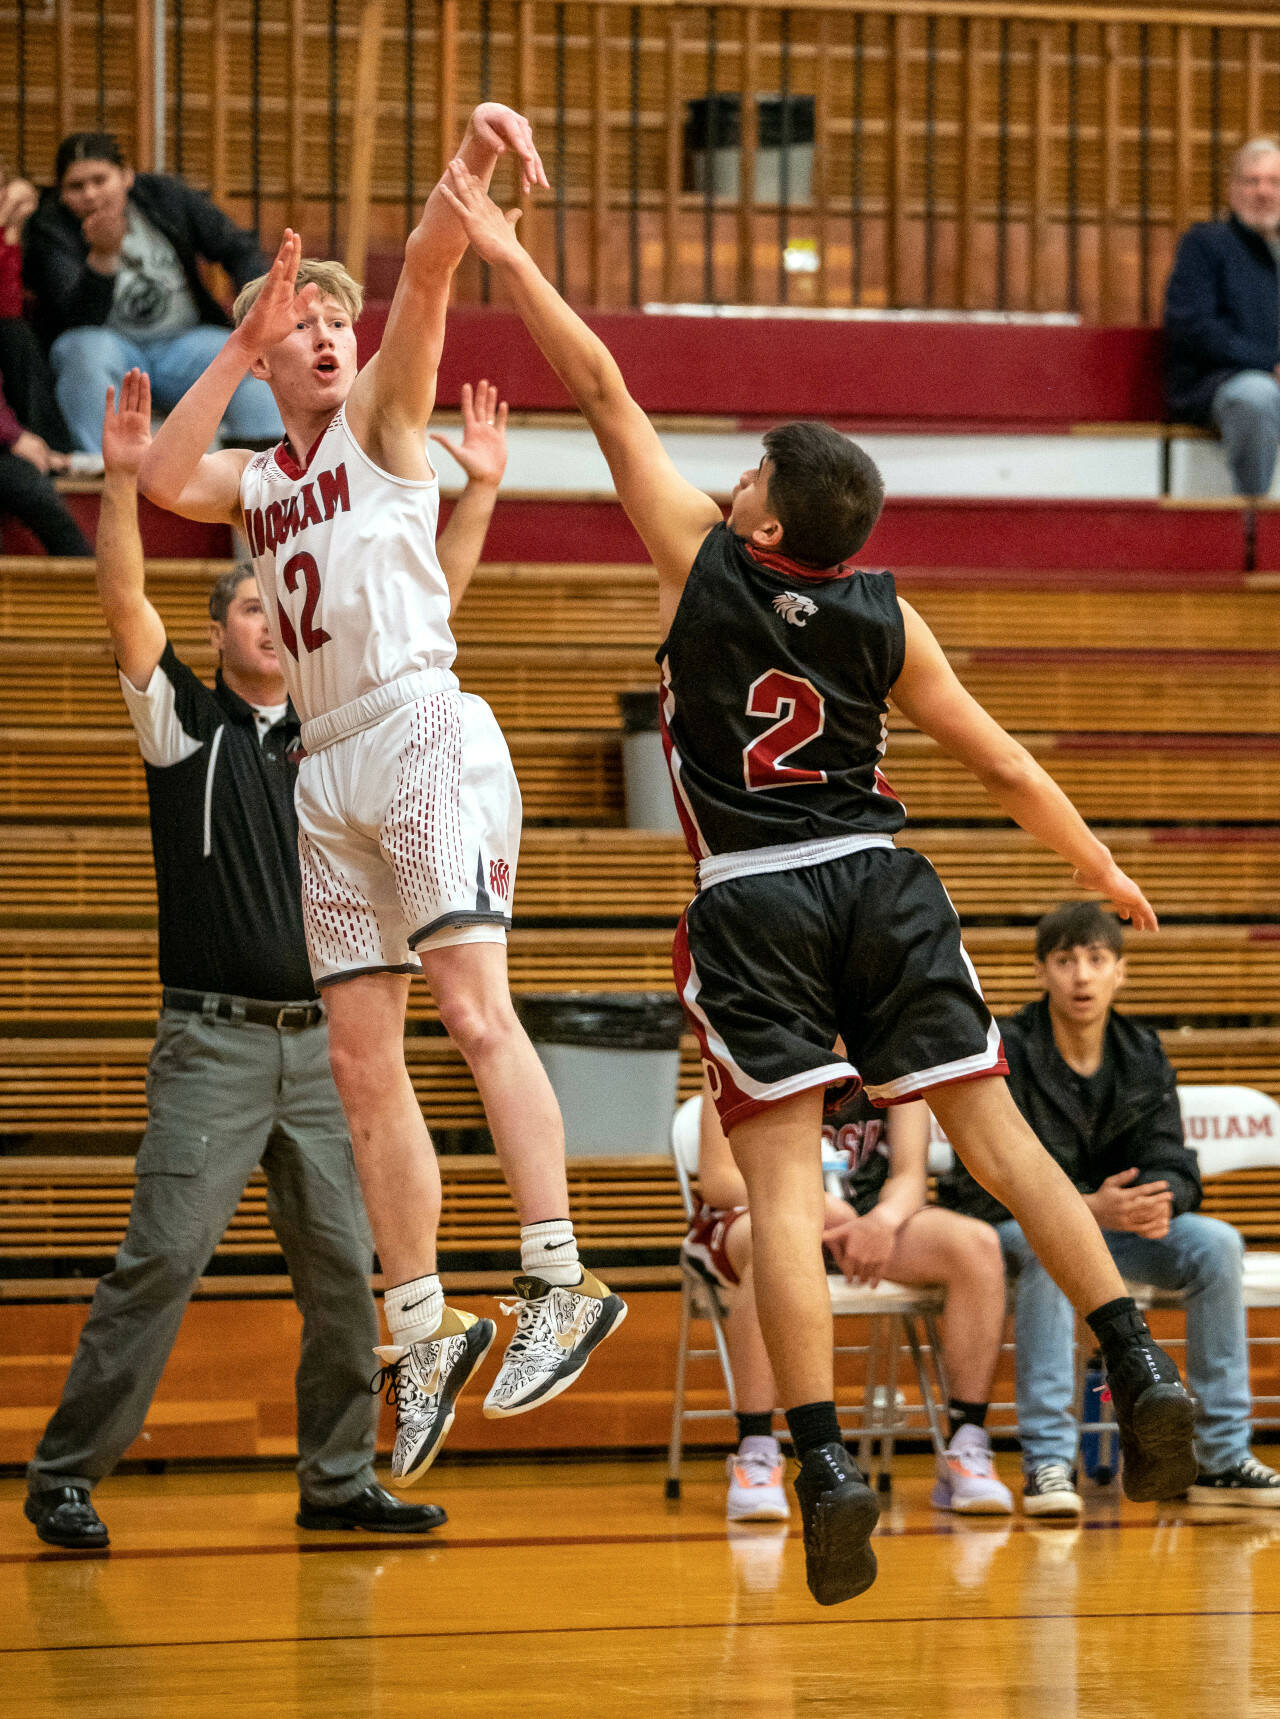 PHOTO BY FOREST WORGUM Hoquiam’s Michael Lorton Watkins (12) puts up a shot over Ocosta’s Kevin Agramon during the Grizzlies’ 69-35 victory on Friday in Hoquiam. Lorton Watkins led all scorers with 22 points.